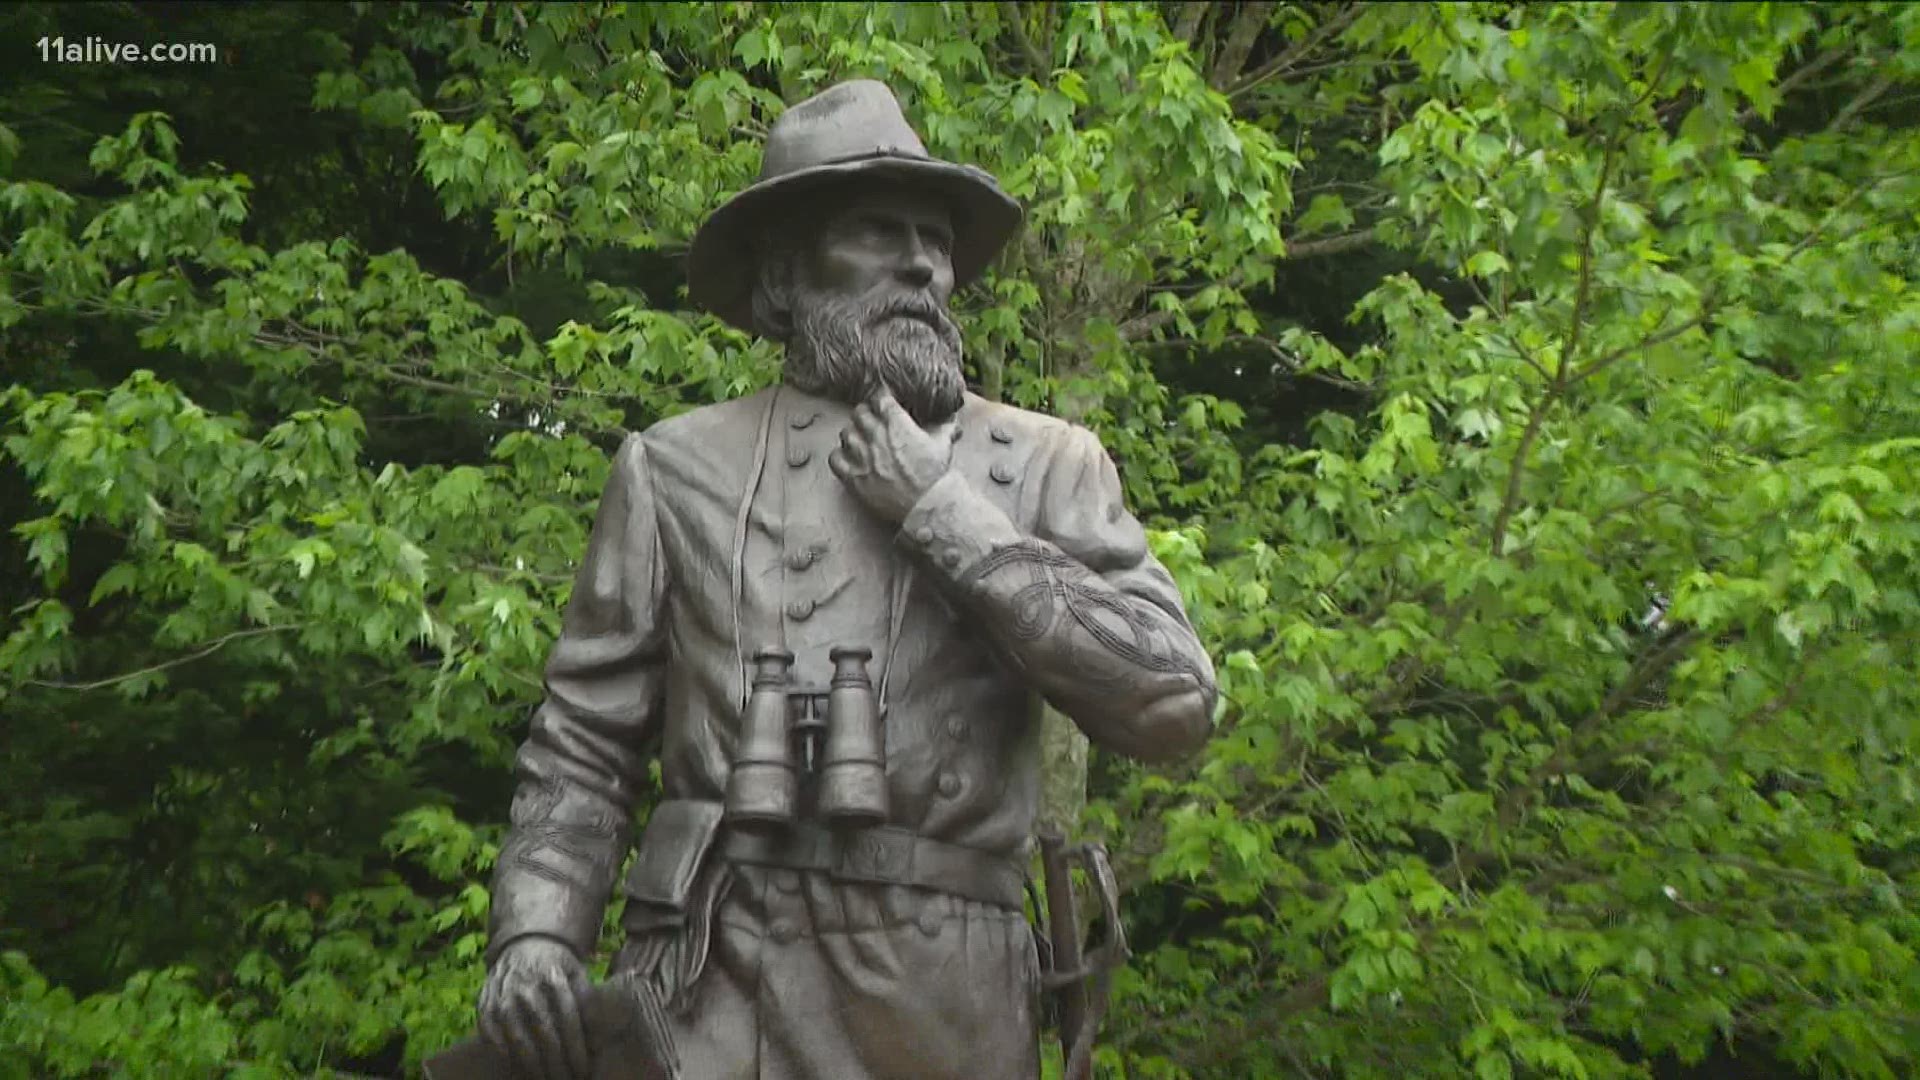 Former Governor Roy Barnes said he favors removing the statue of General Gordon.